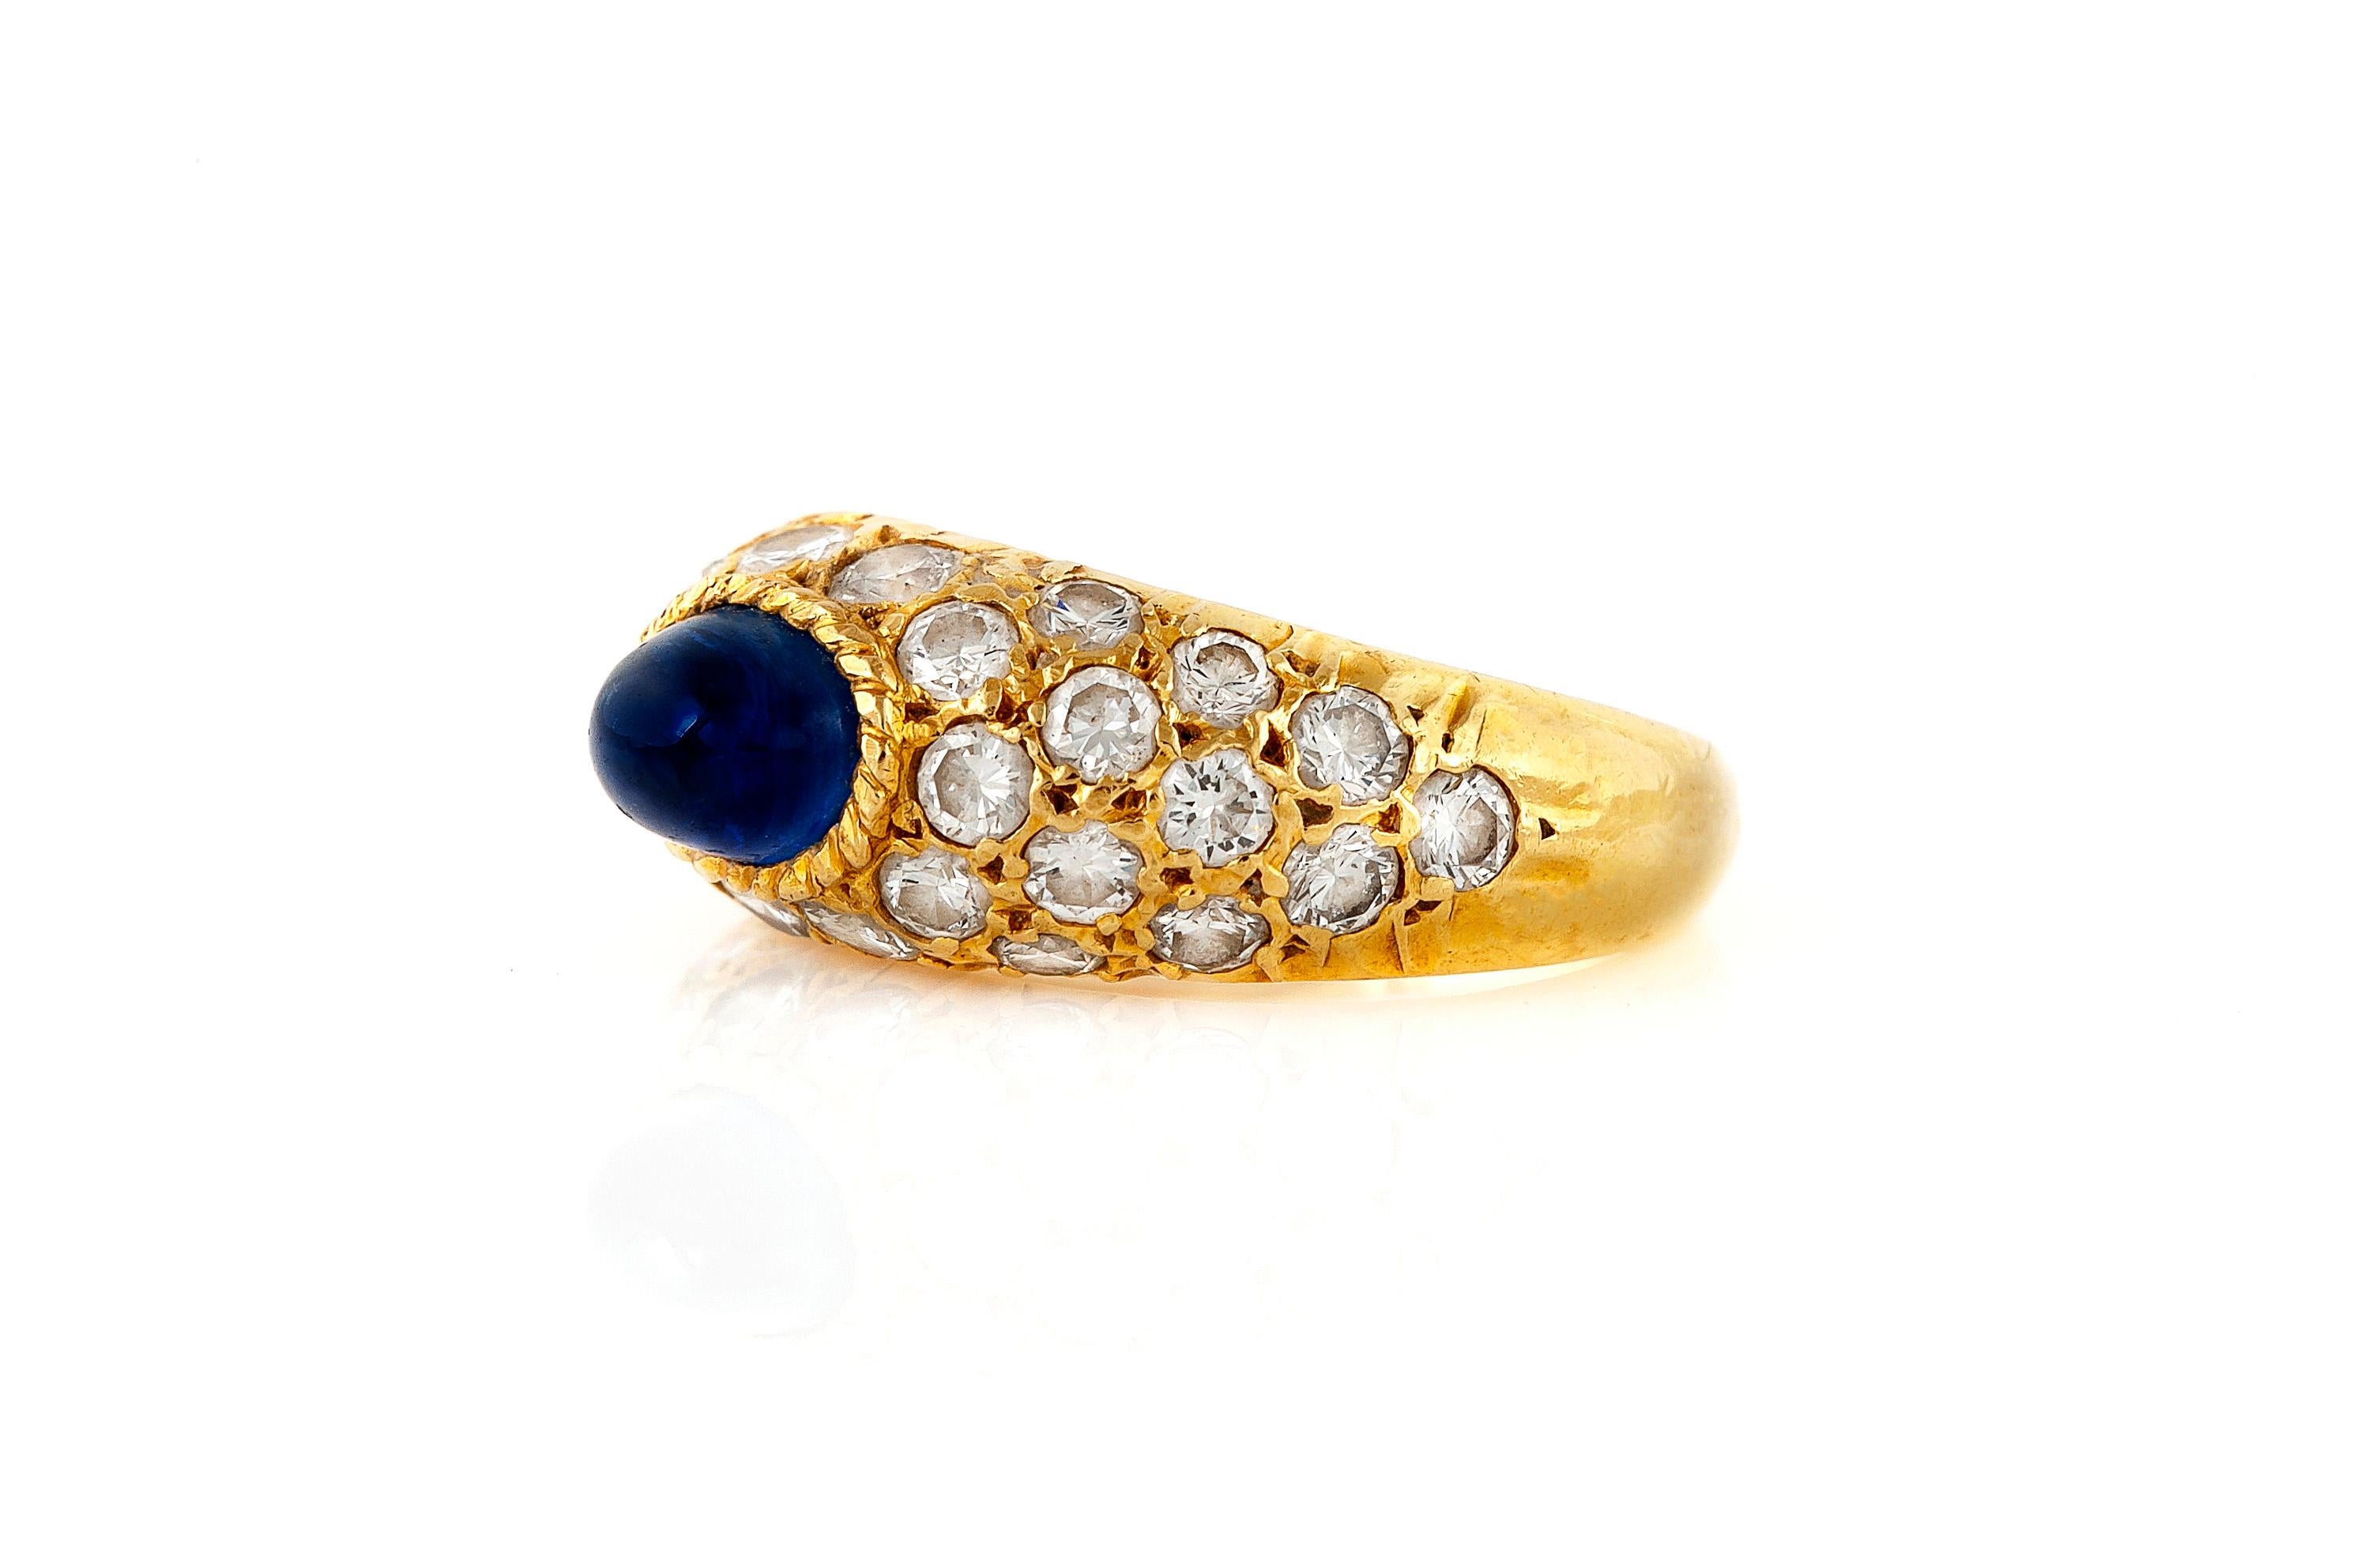 Finely crafted in 18k yellow gold with a Cabochon Sapphire and Round Brilliant cut Diamonds.
Signed by Van Cleef & Arpels.
Circa 1980s
Size 3 1/2